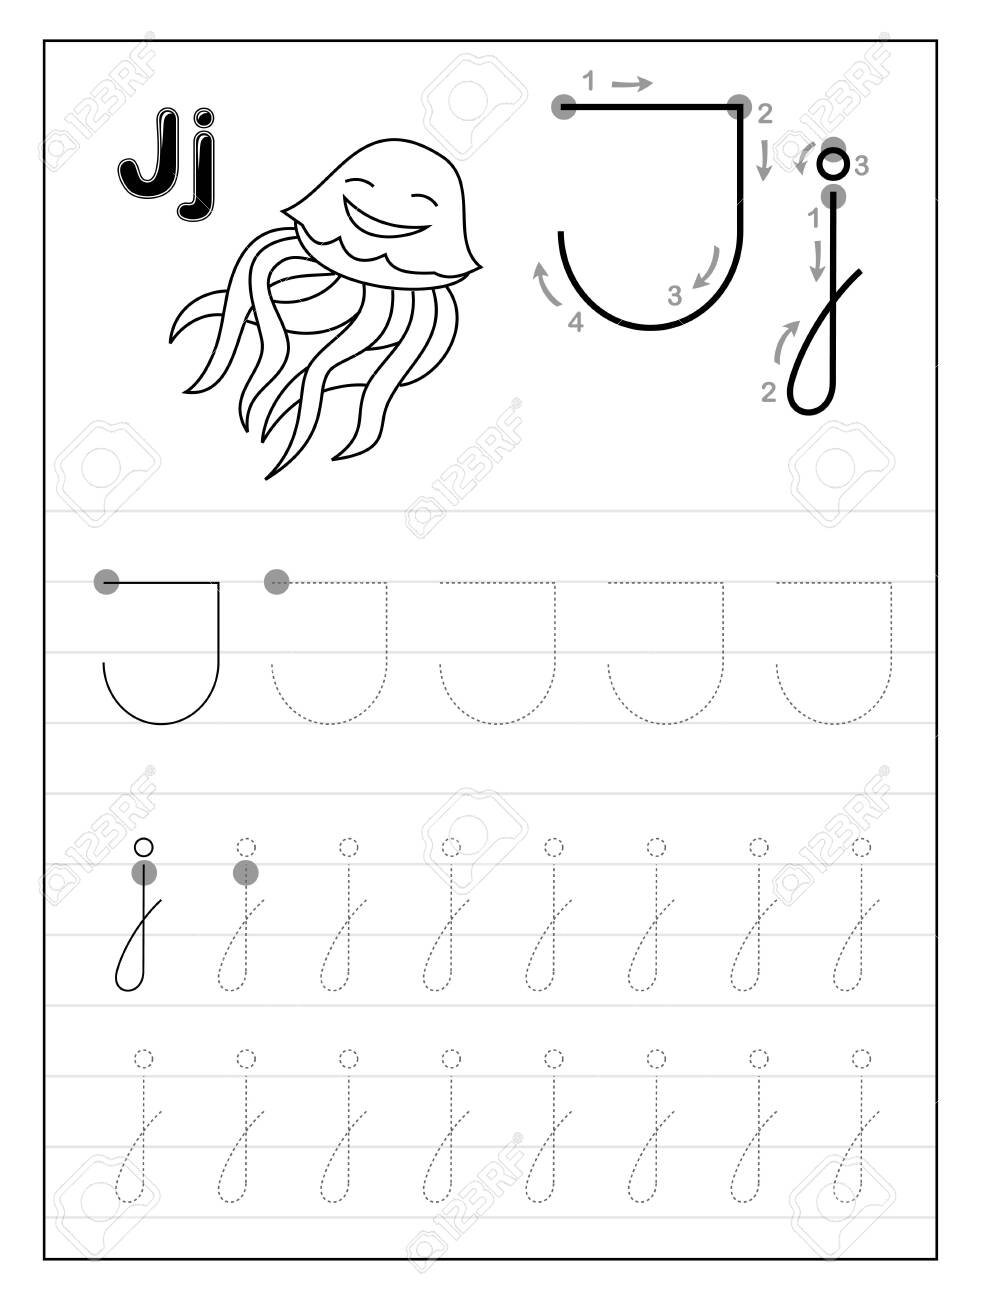 Tracing Alphabet Letter J. Black And White Educational Pages..